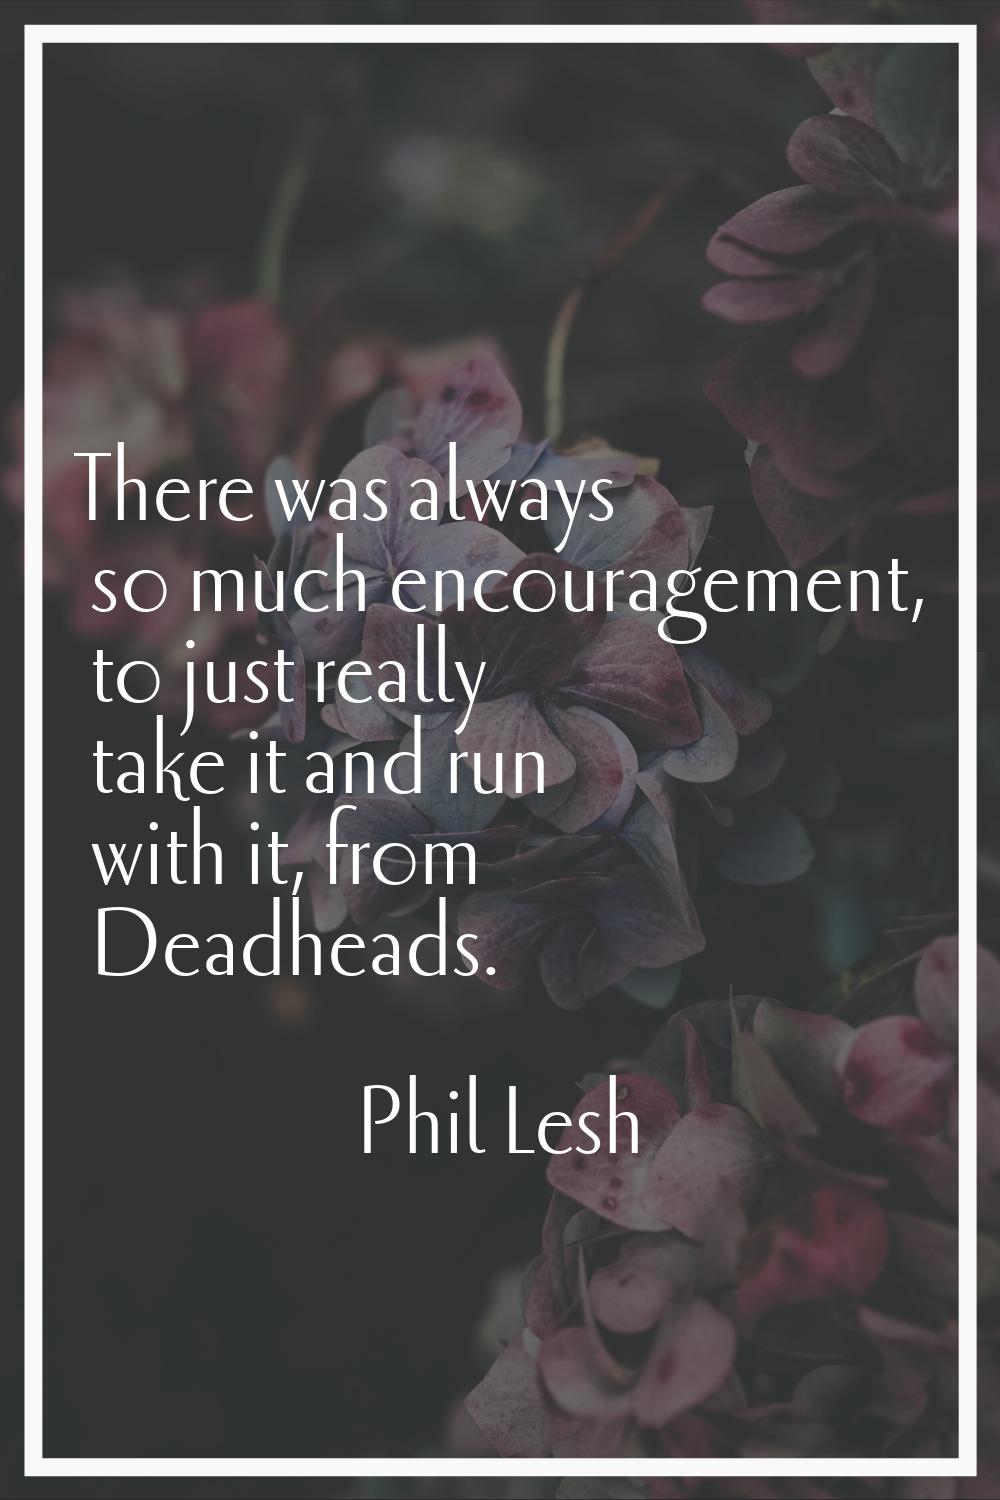 There was always so much encouragement, to just really take it and run with it, from Deadheads.